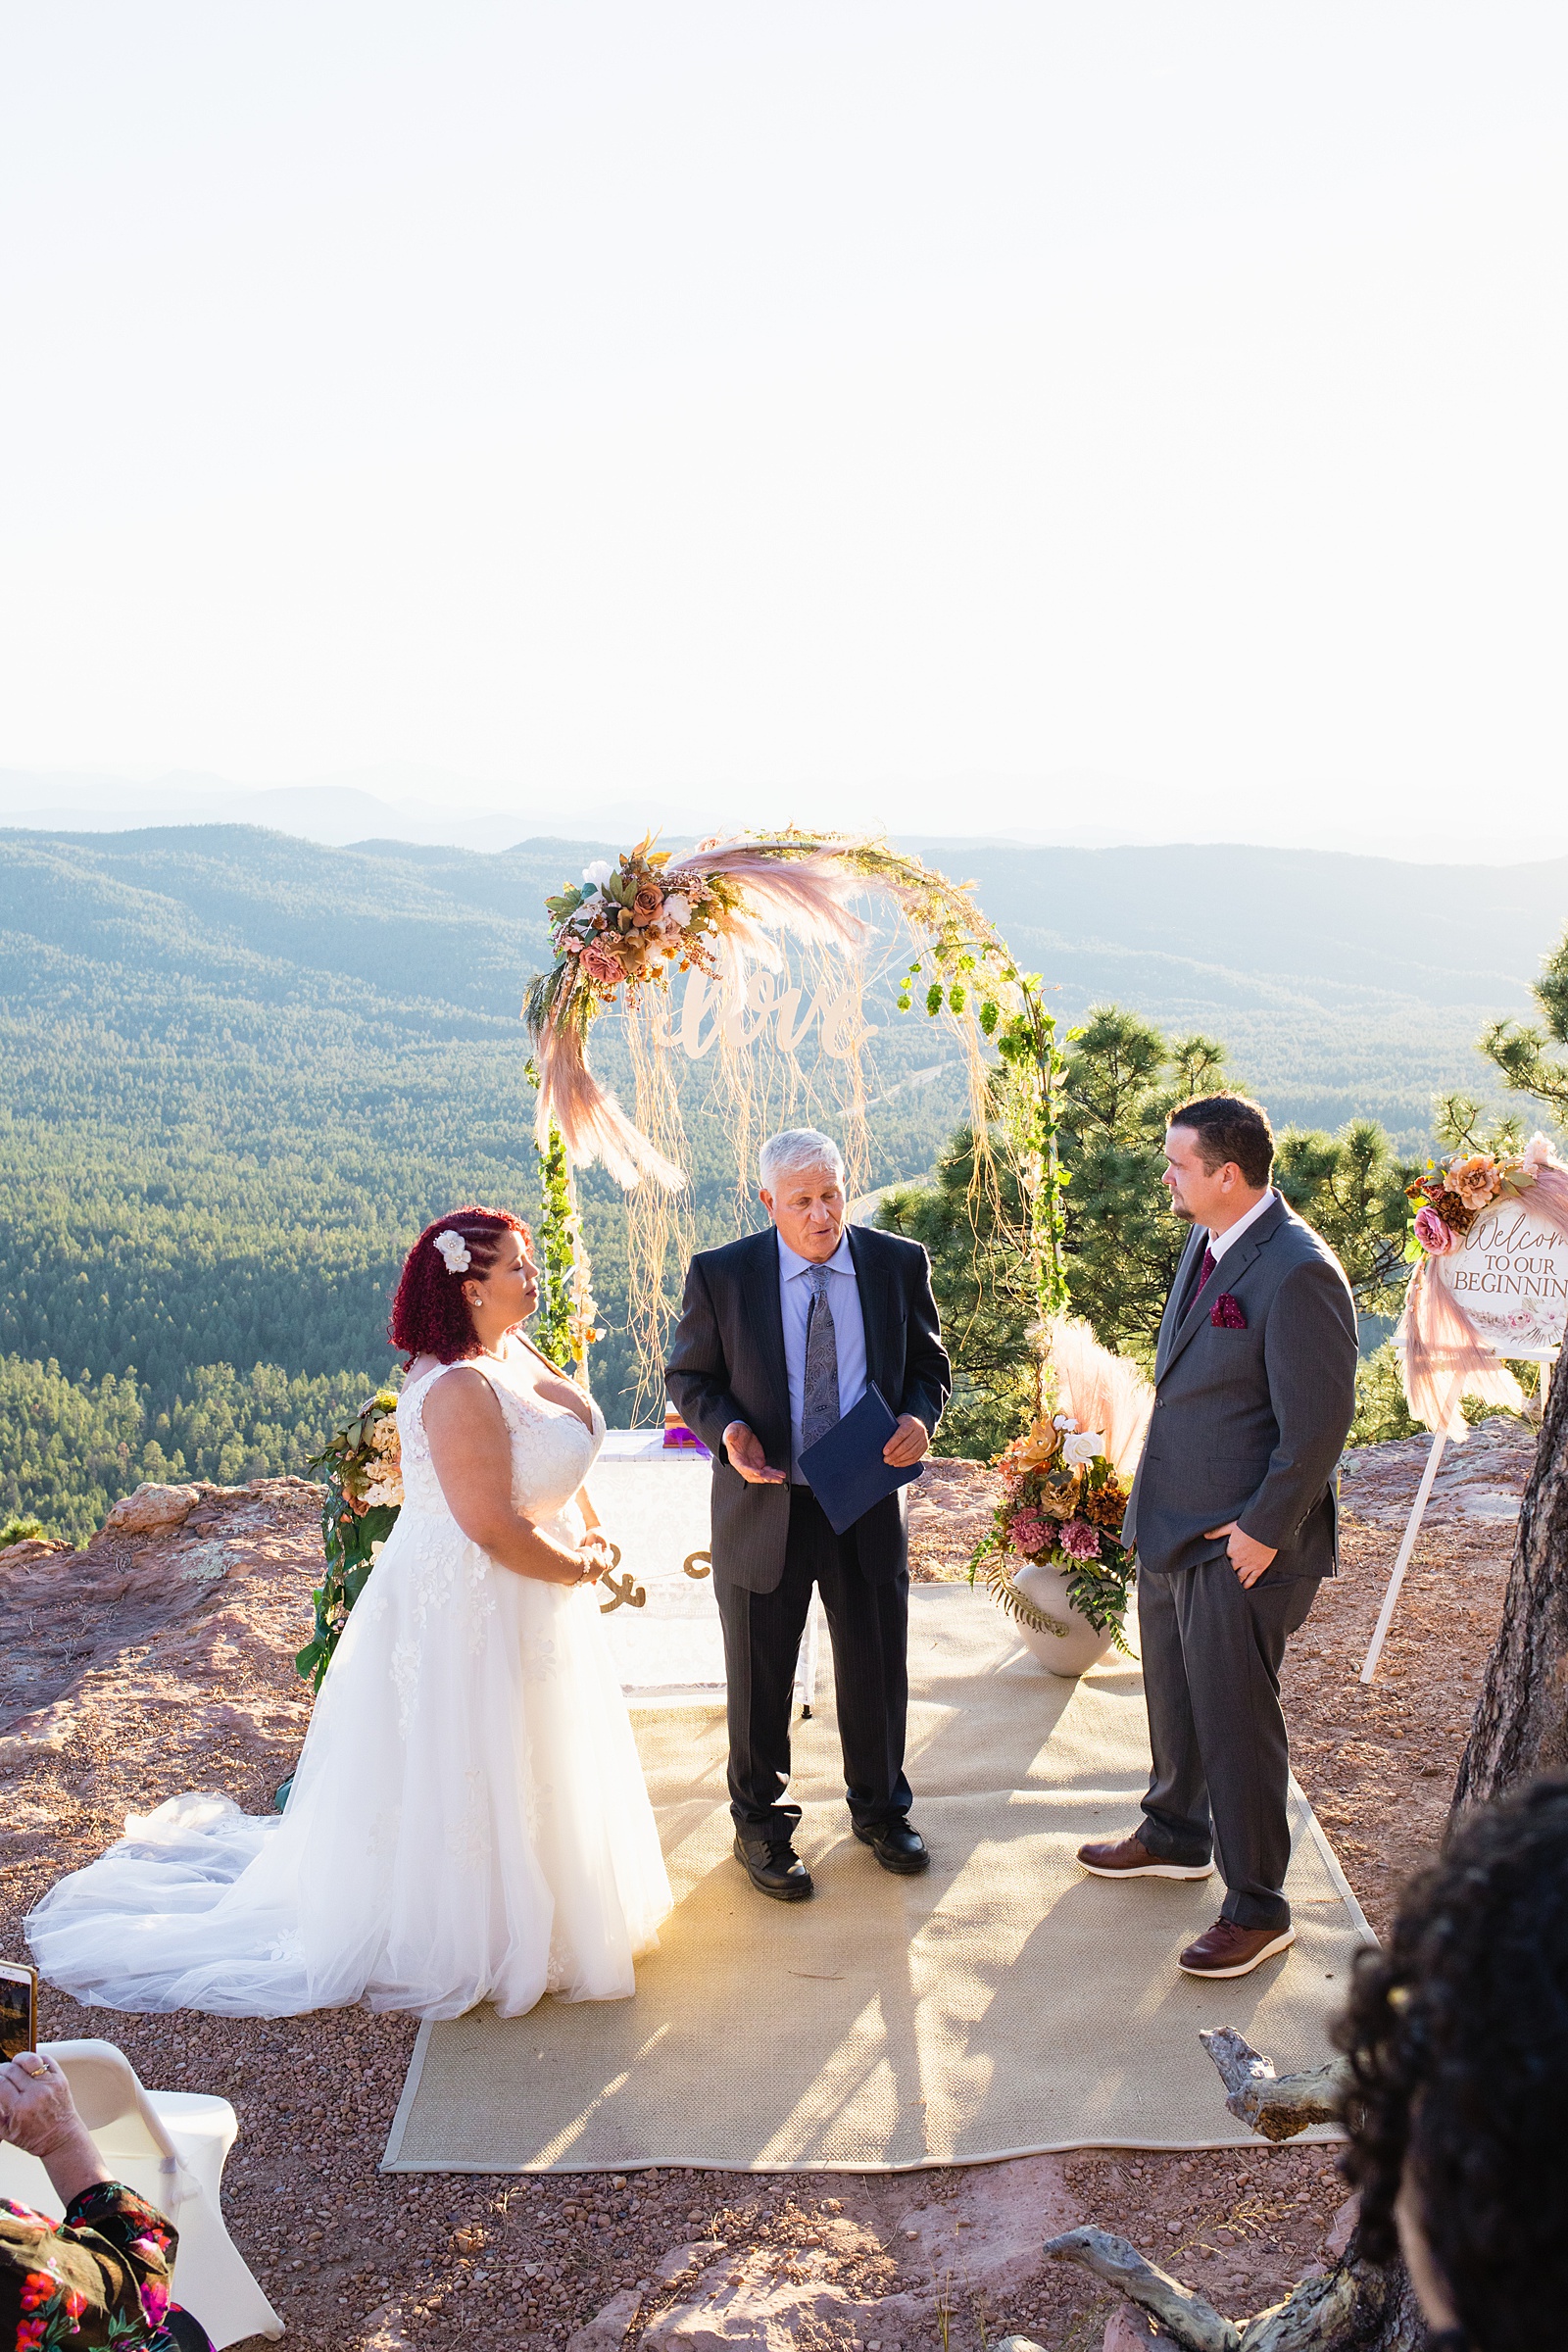 Groom looking at his bride during their wedding ceremony at Mogollon Rim by Northern Arizona elopement photographer PMA Photography.